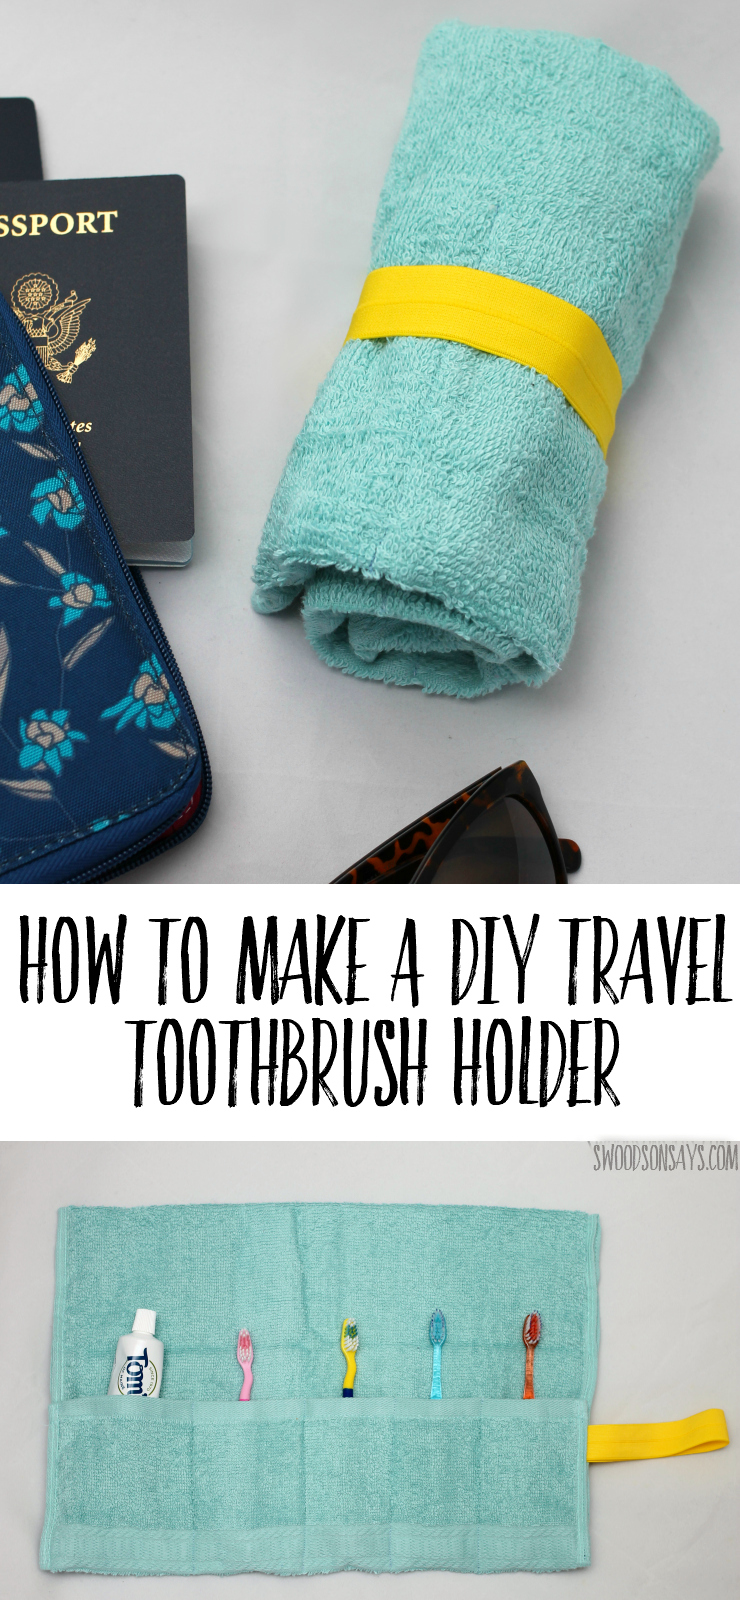 How To Make A DIY Travel Toothbrush Holder - follow this easy beginner sewing tutorial and upcycle a hand towel. This is a great sewing project for travel or cheap handmade gift, it is useful and easy to personalize! #sewing